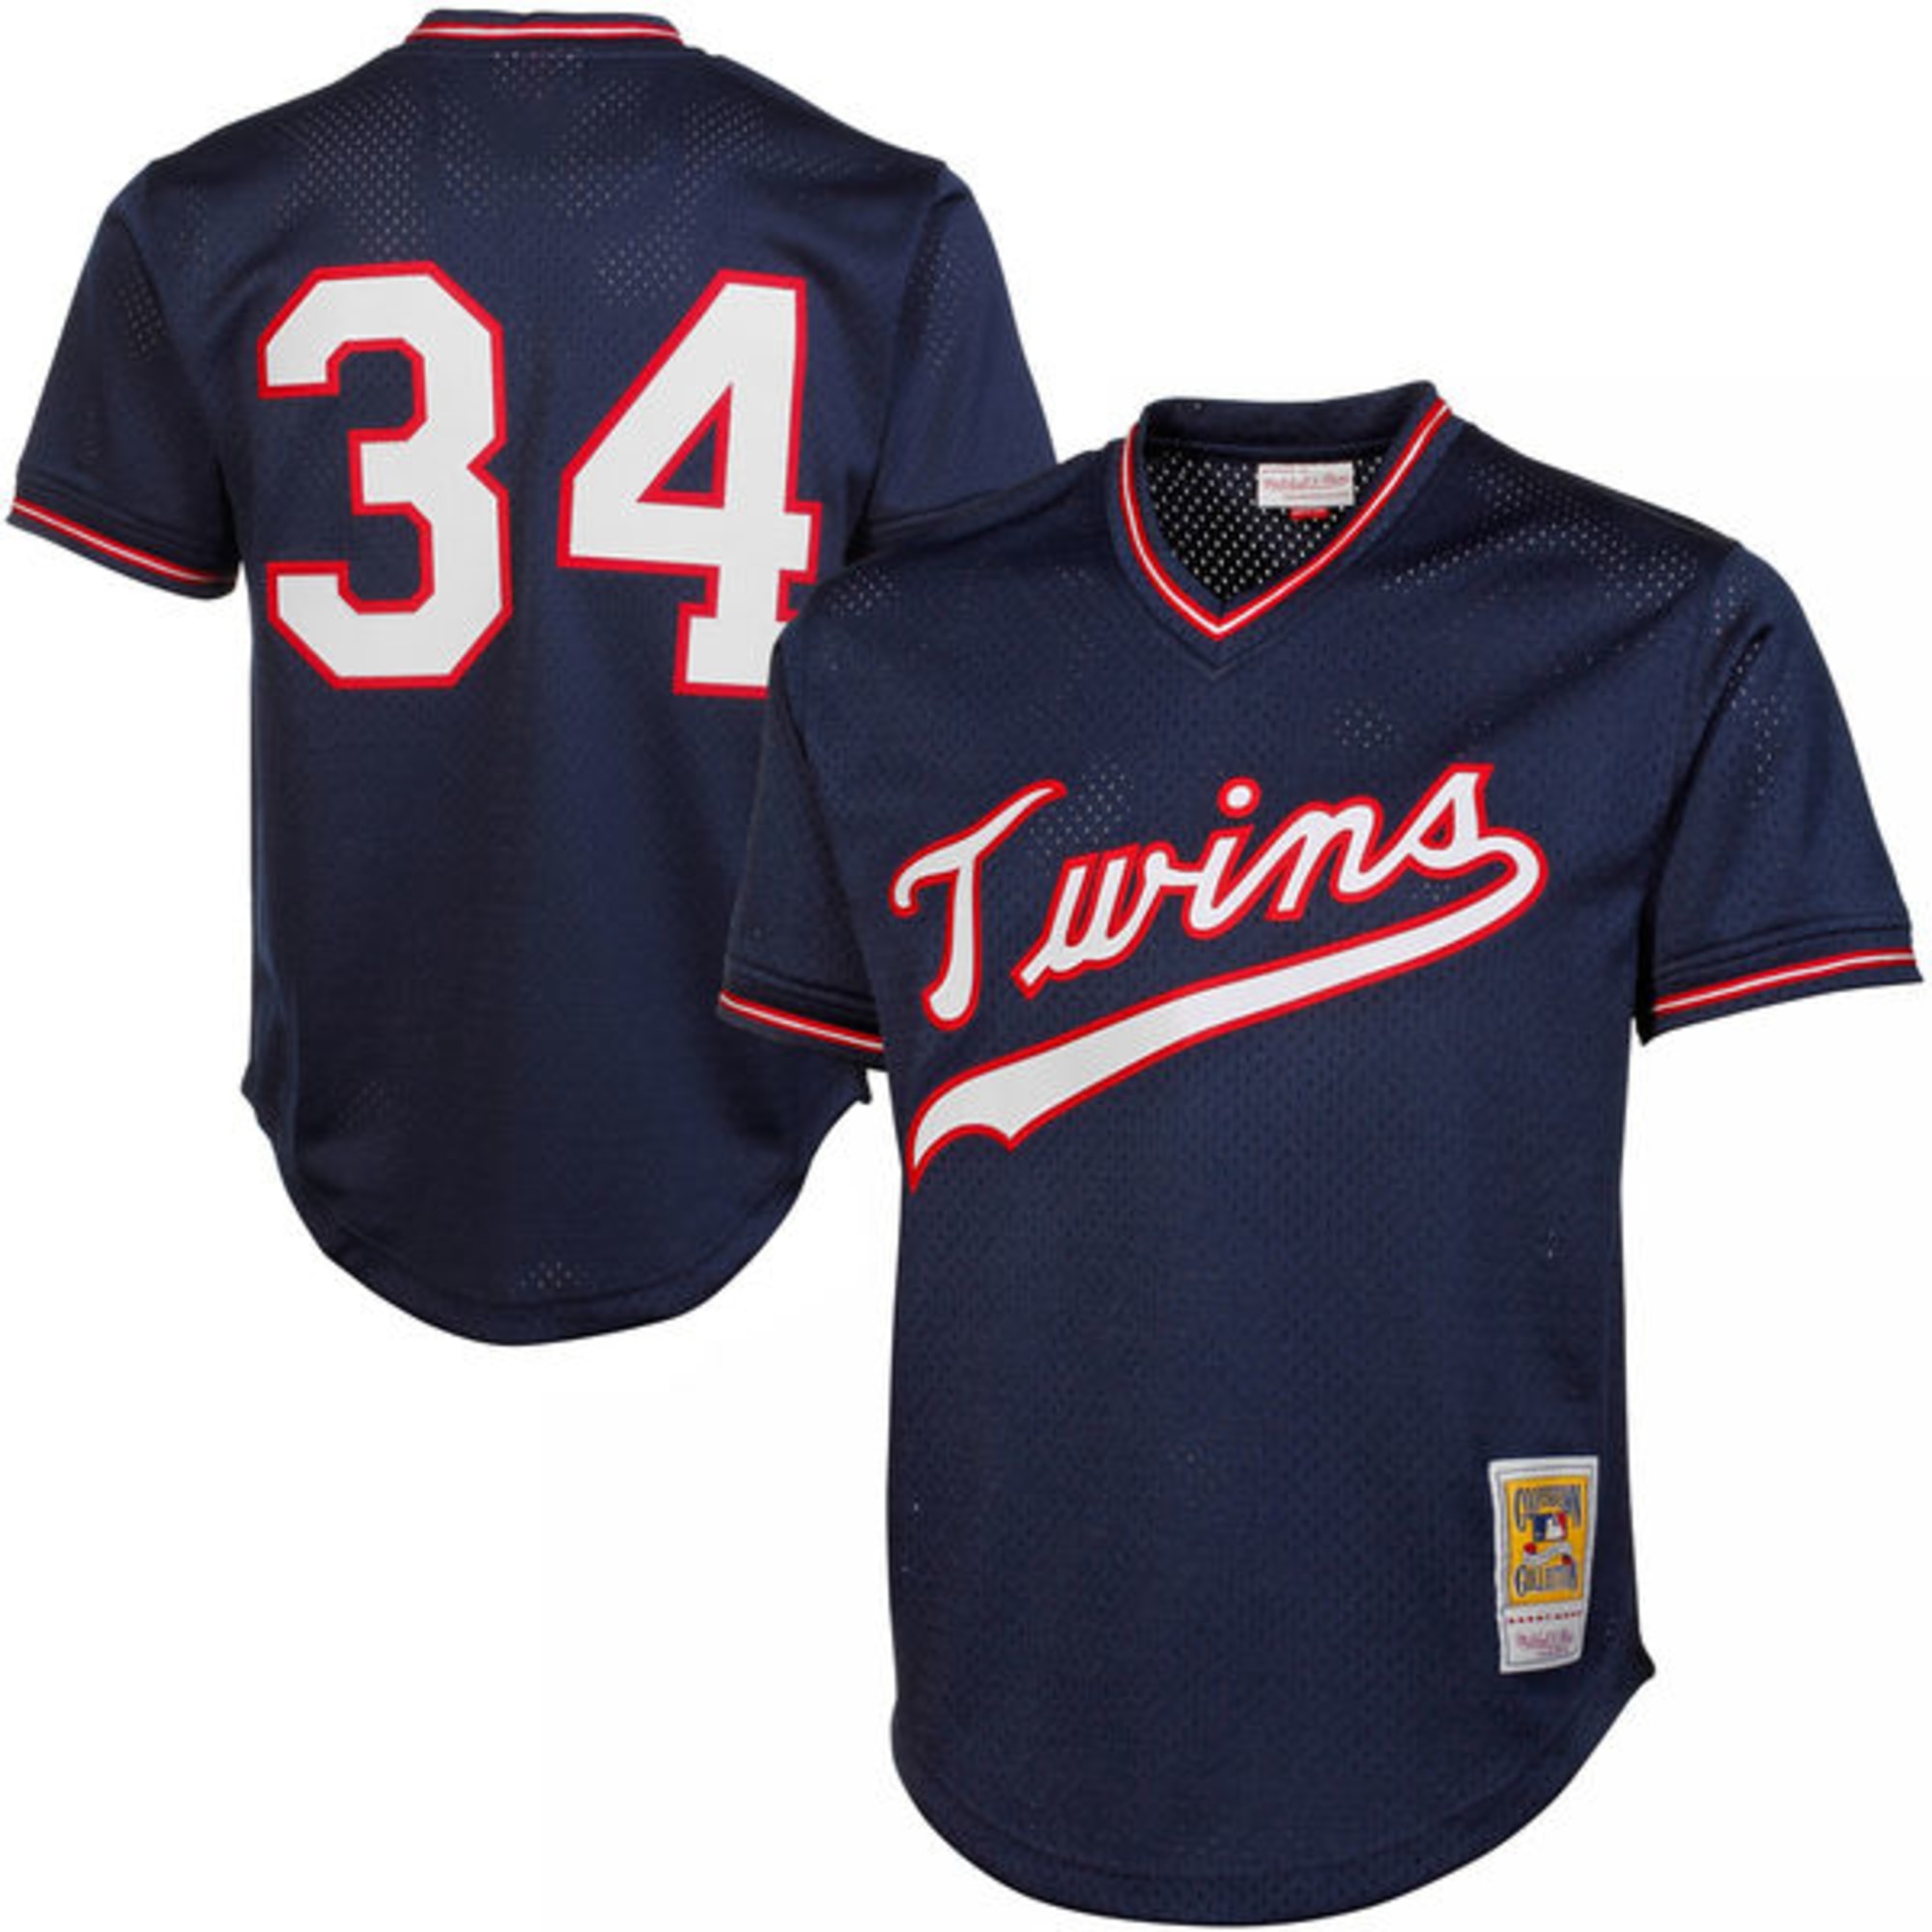 Minnesota Twins Gift Guide 10 musthave items for Opening Day